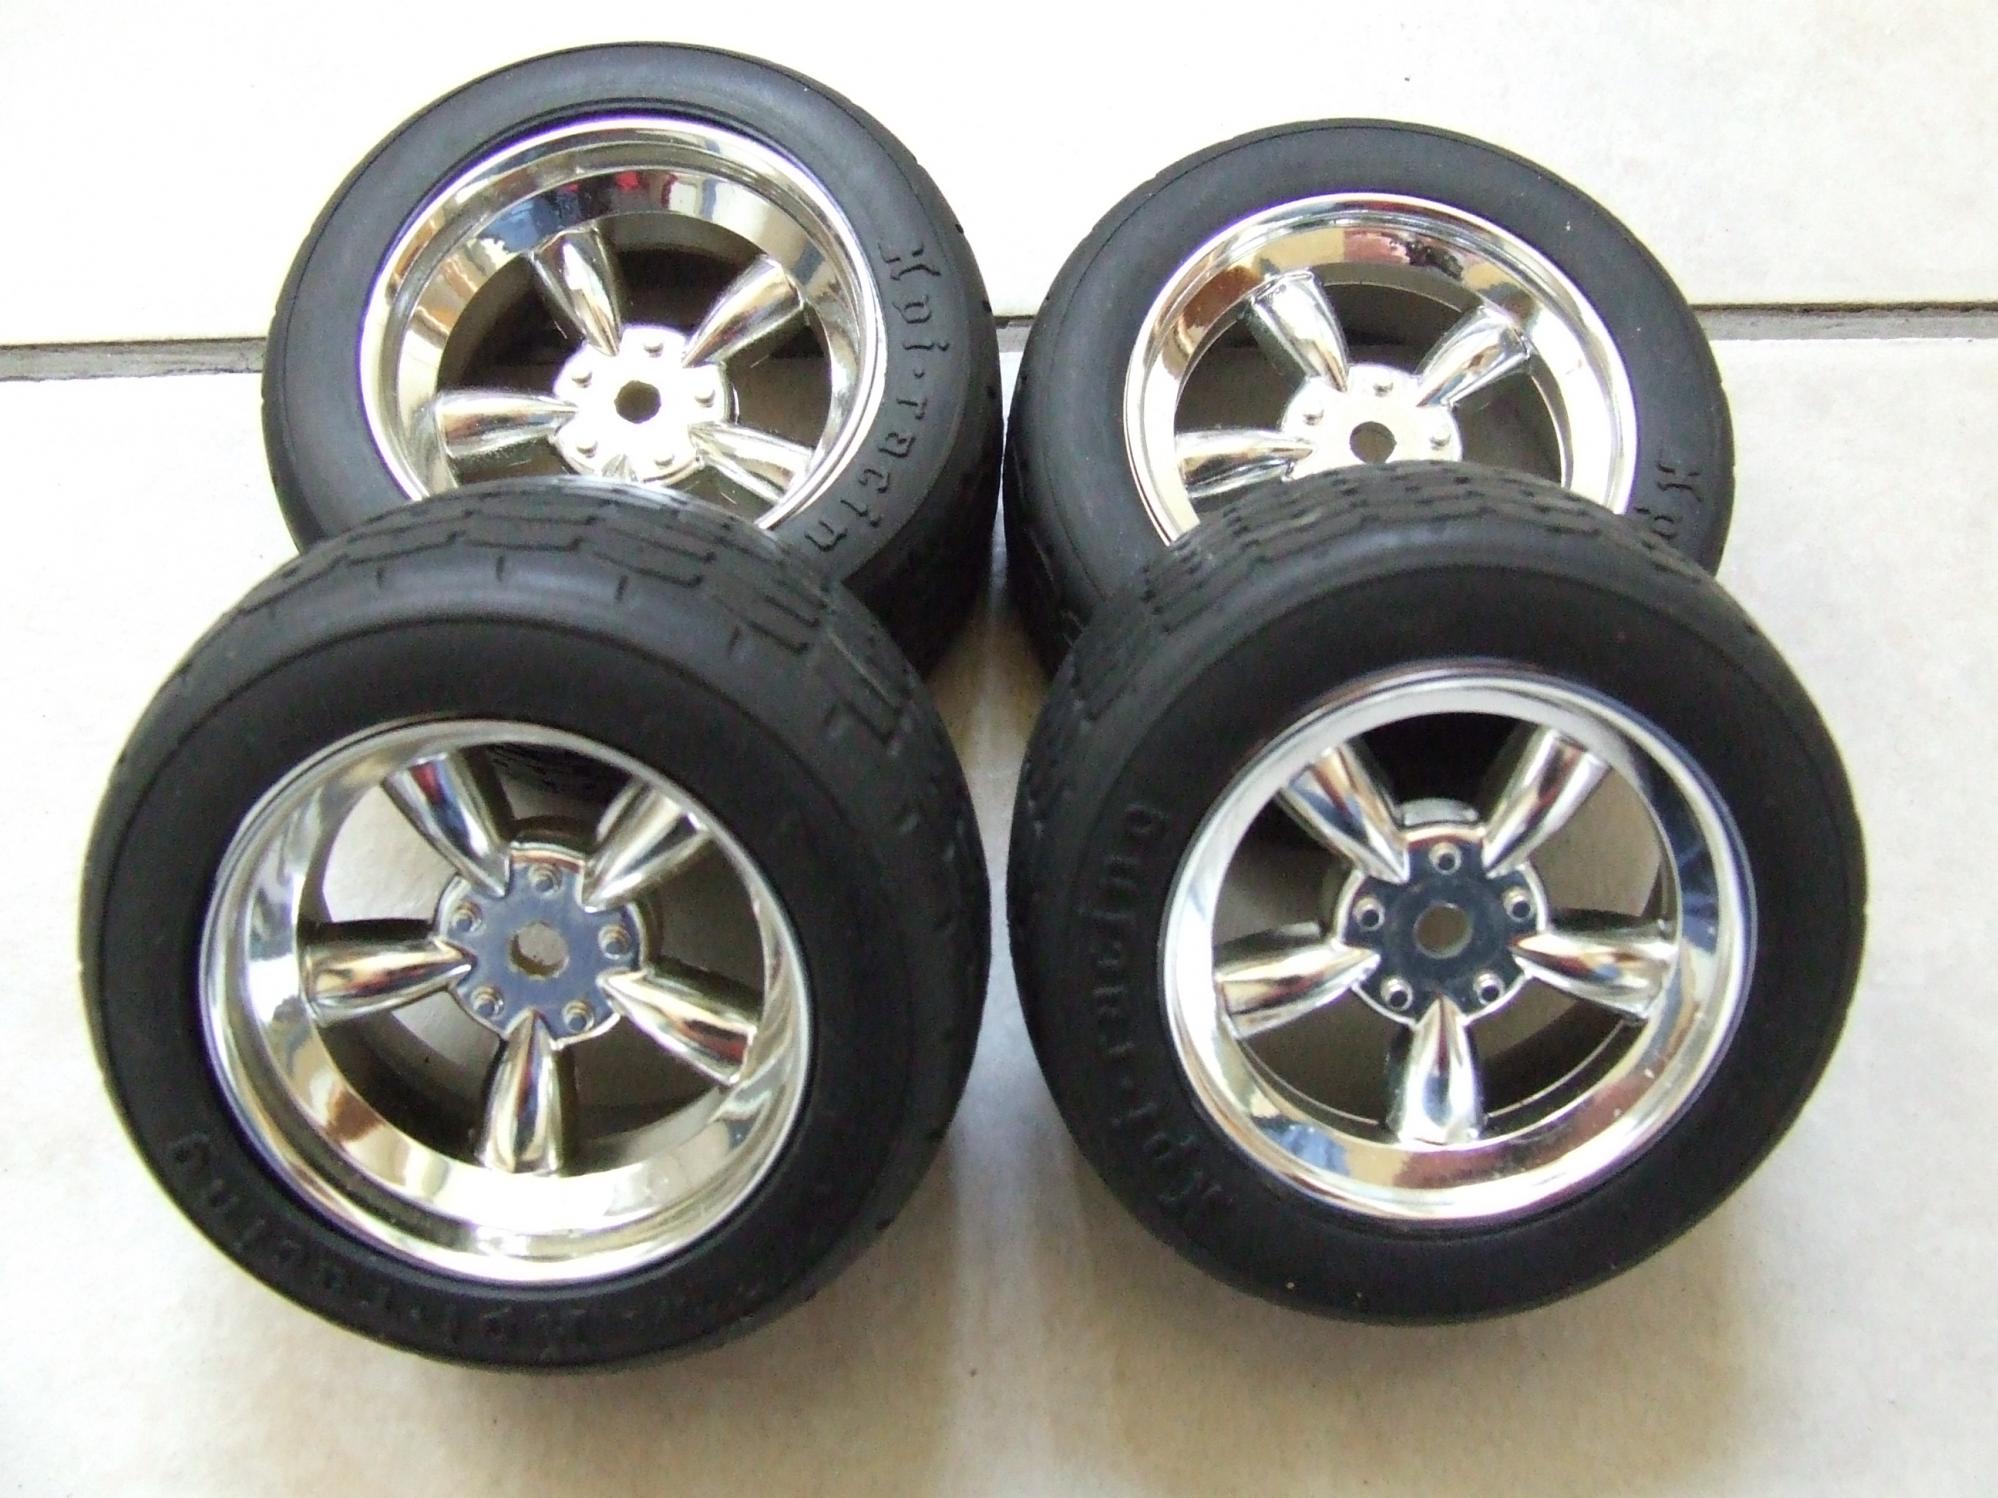 Vintage Tires and Rims for Sale